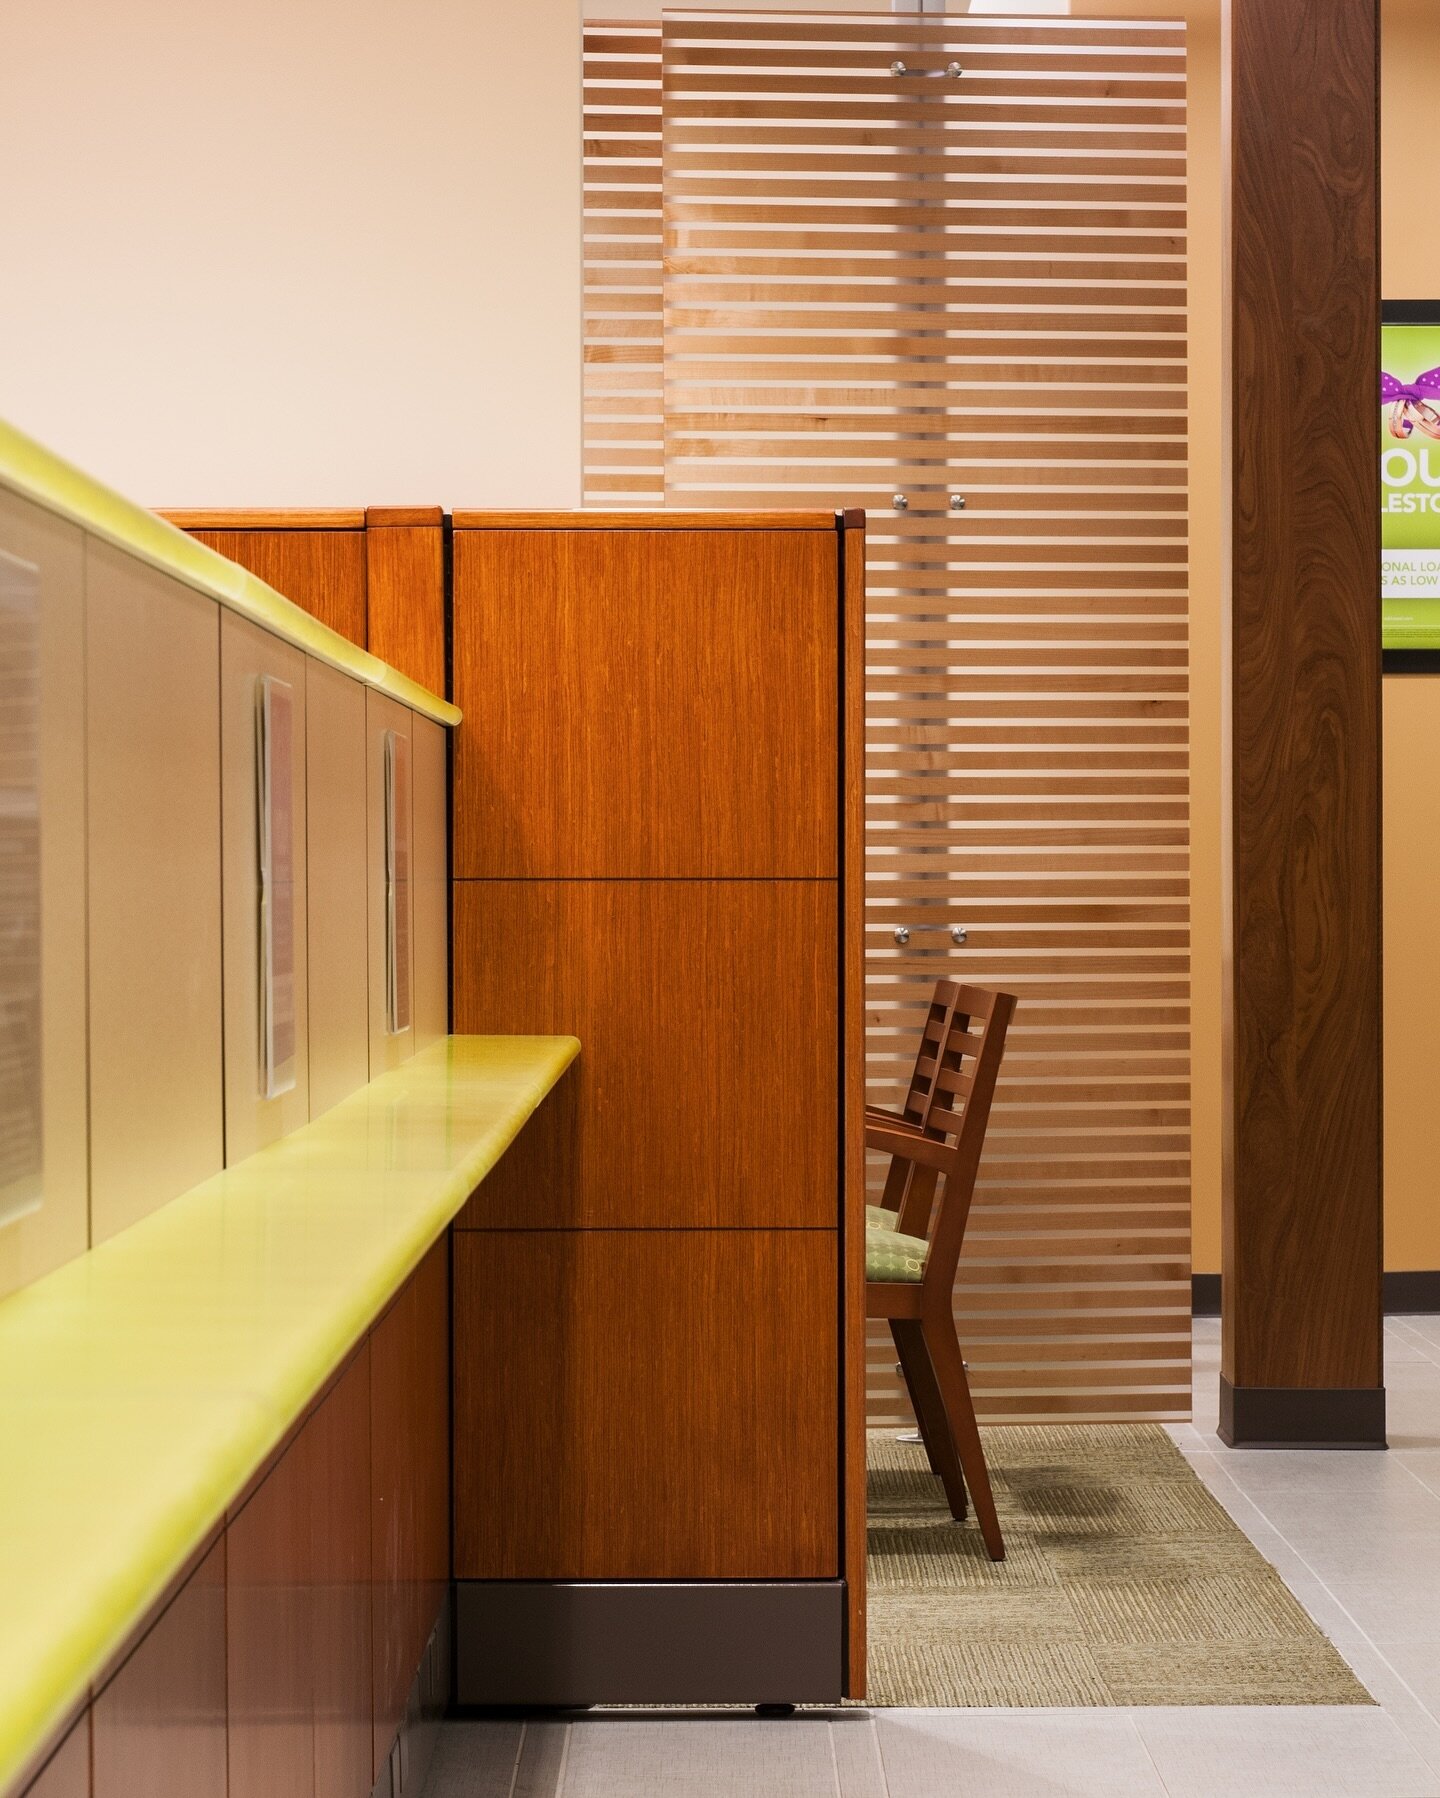 It&rsquo;s all in the details ✨.

Through a complete interior remodel with some exterior improvements, WhiteSpace Architects helped transform the American Savings Bank Kailua Branch bright, fresh, upbeat space, with improved spatial flow and modern, 